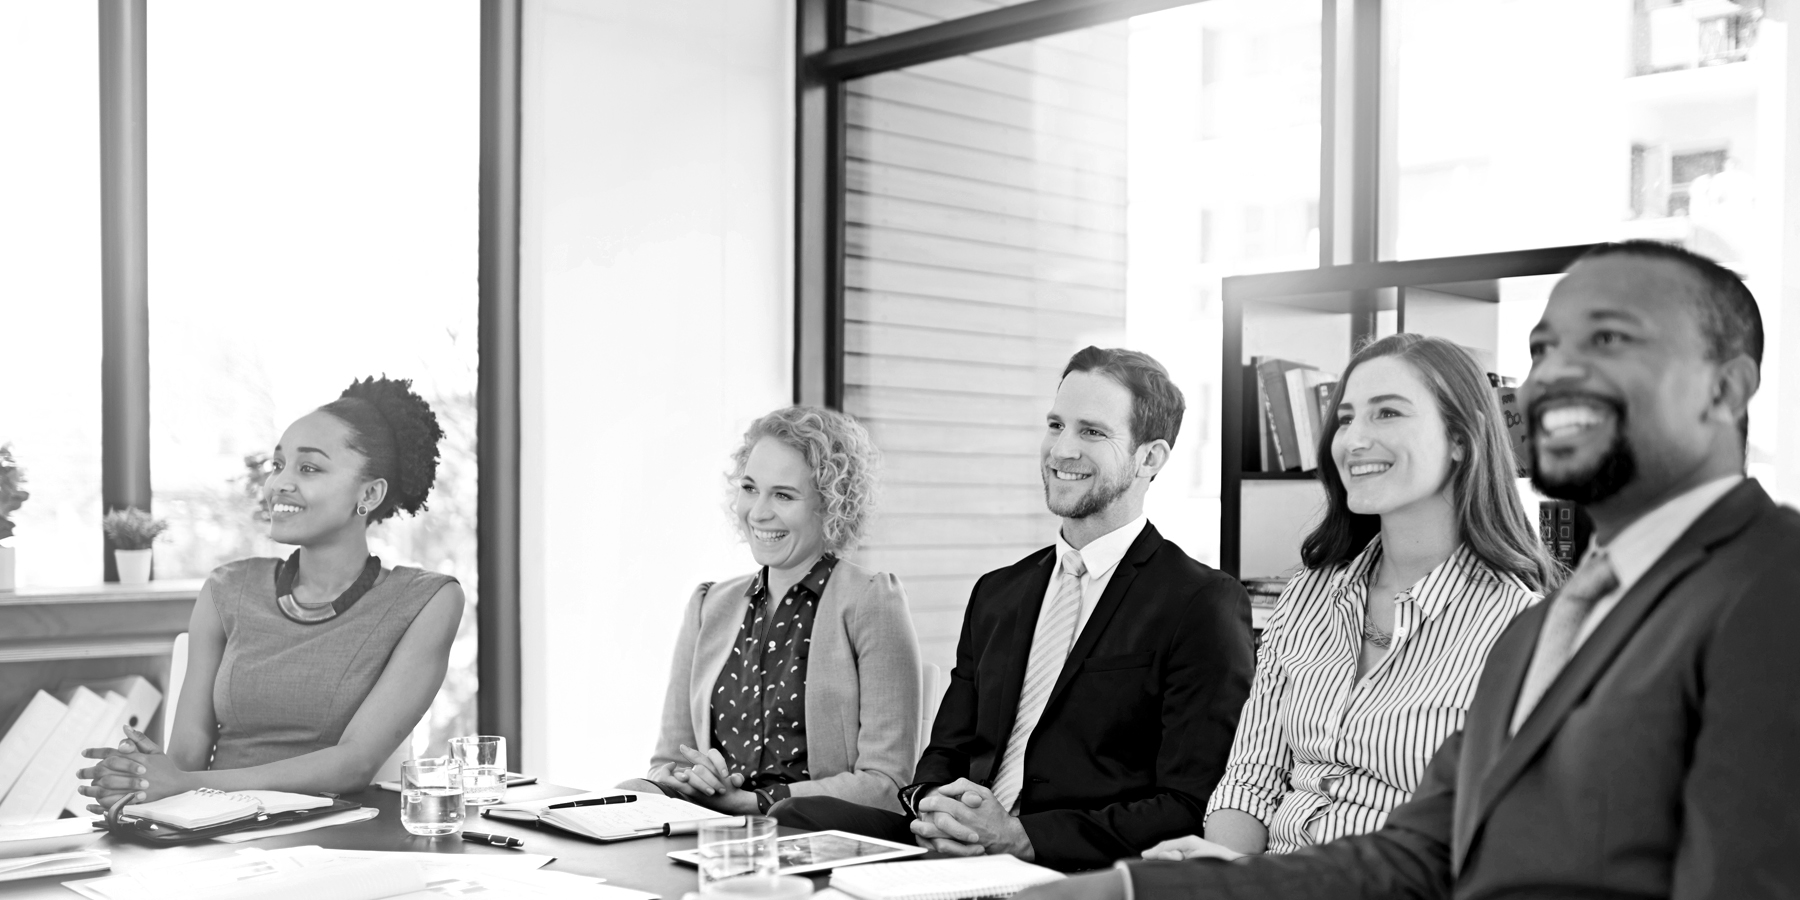 People smiling in a meeting